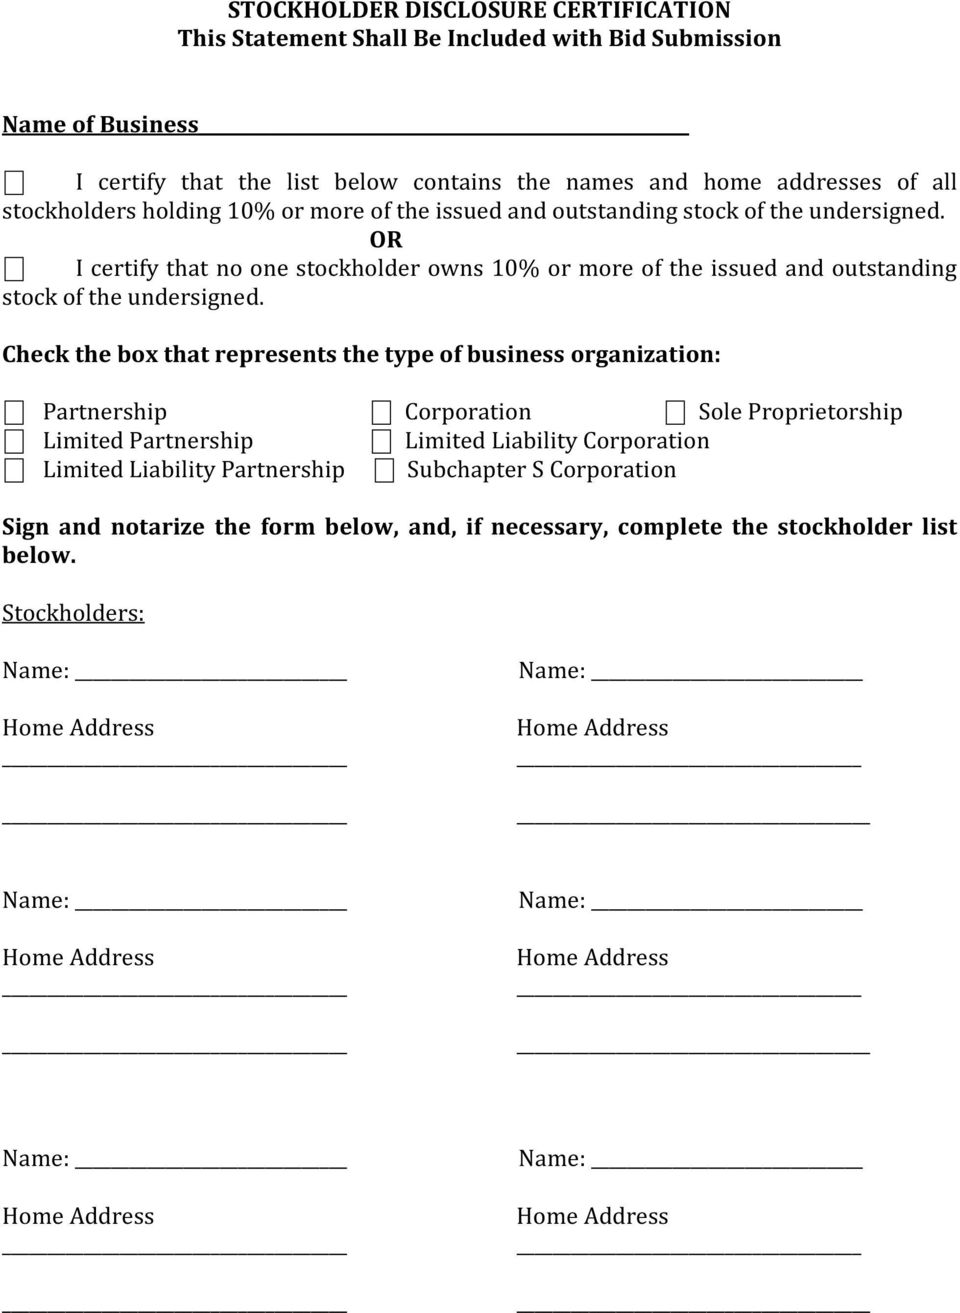 Check the box that represents the type of business organization: Partnership Corporation Sole Proprietorship Limited Partnership Limited Liability Corporation Limited Liability Partnership Subchapter